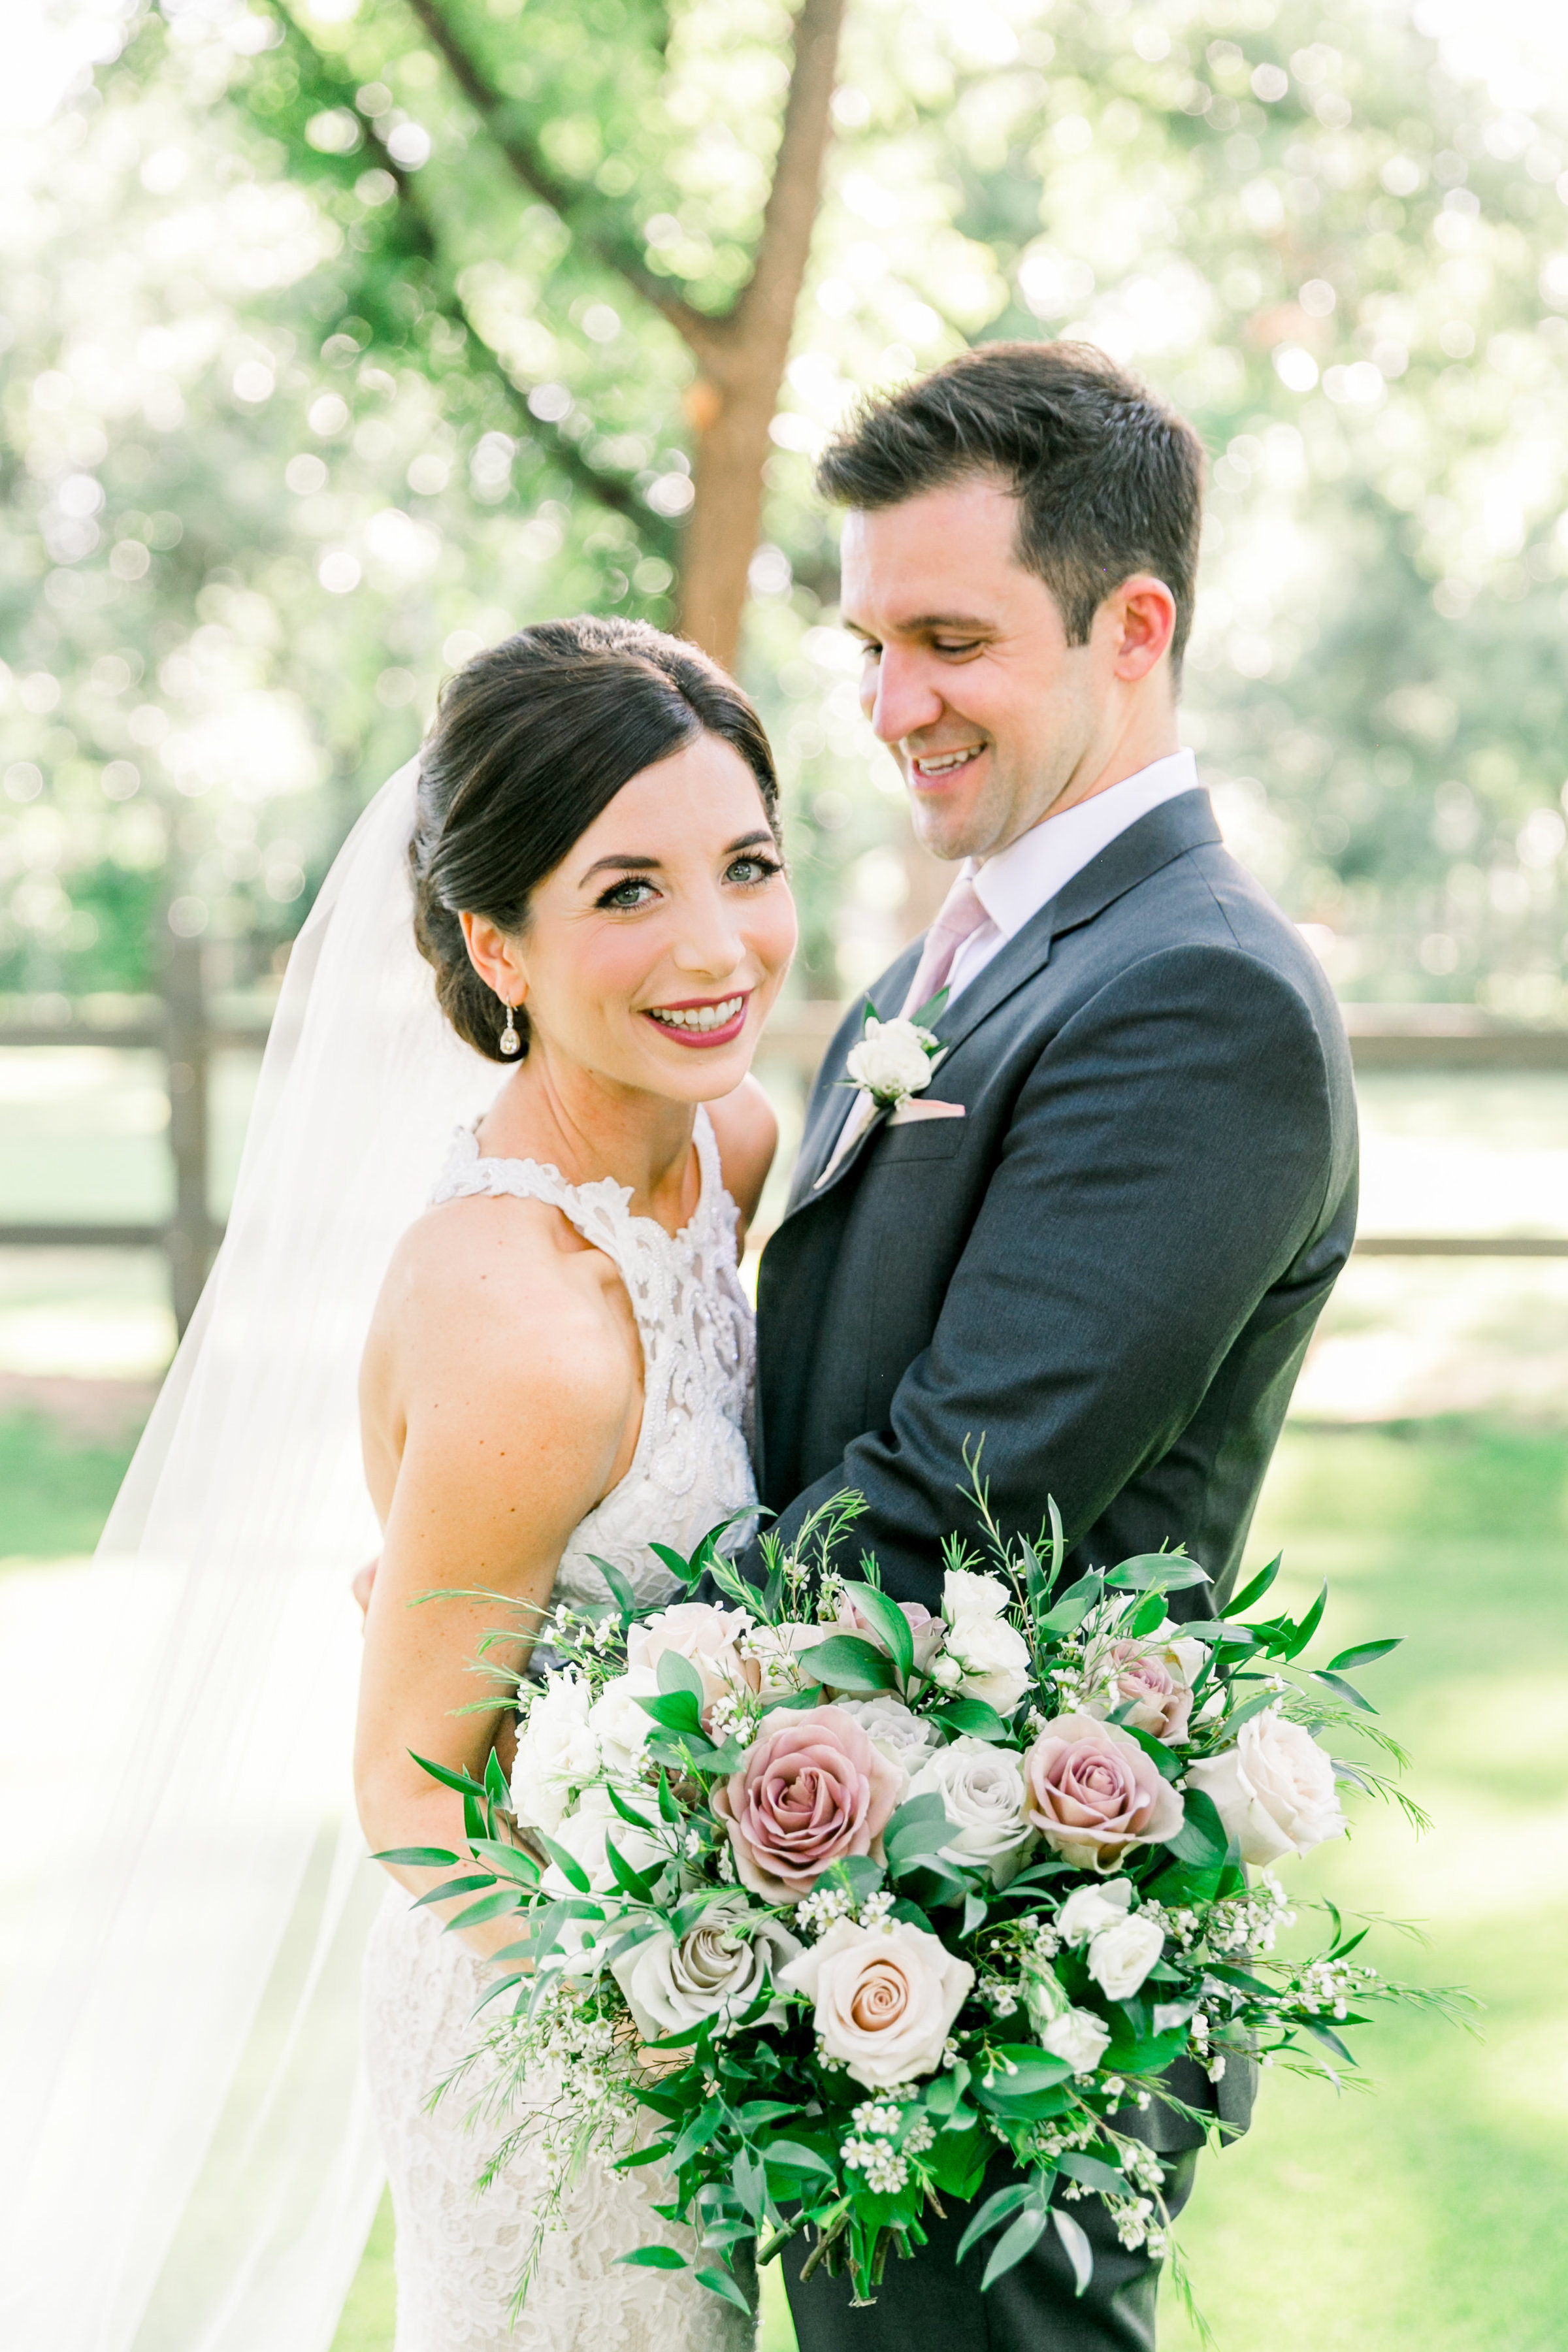 Karlie Colleen Photography - Venue At The Grove - Arizona Wedding - Maggie & Grant -59